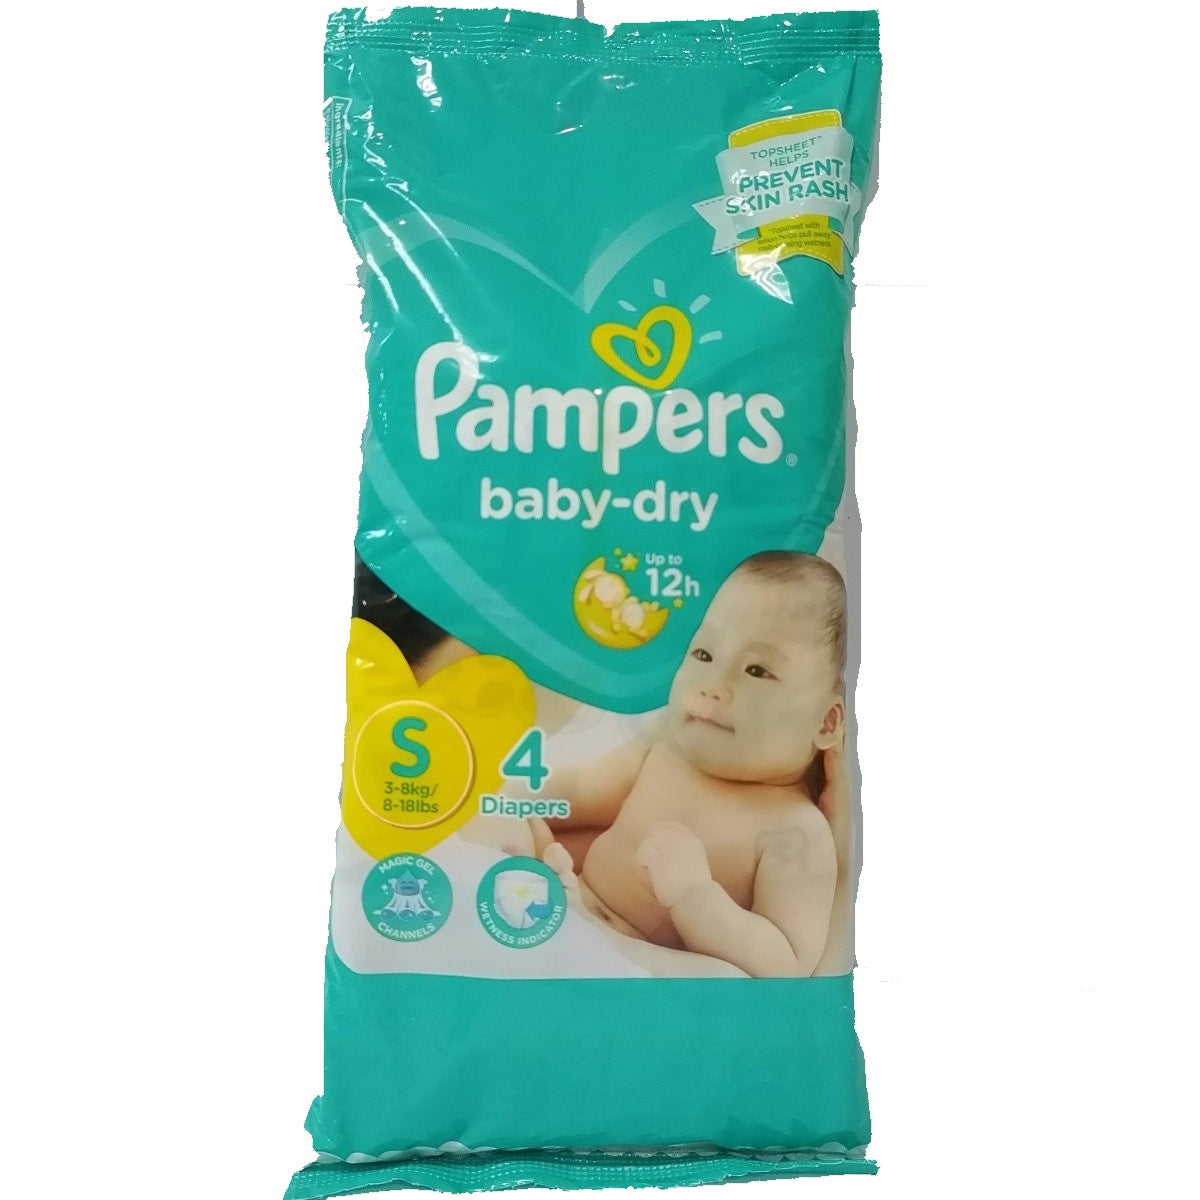 Buy Pampers New Diapers Pants, Small, 40 Count Online at Low Prices in  India - Amazon.in